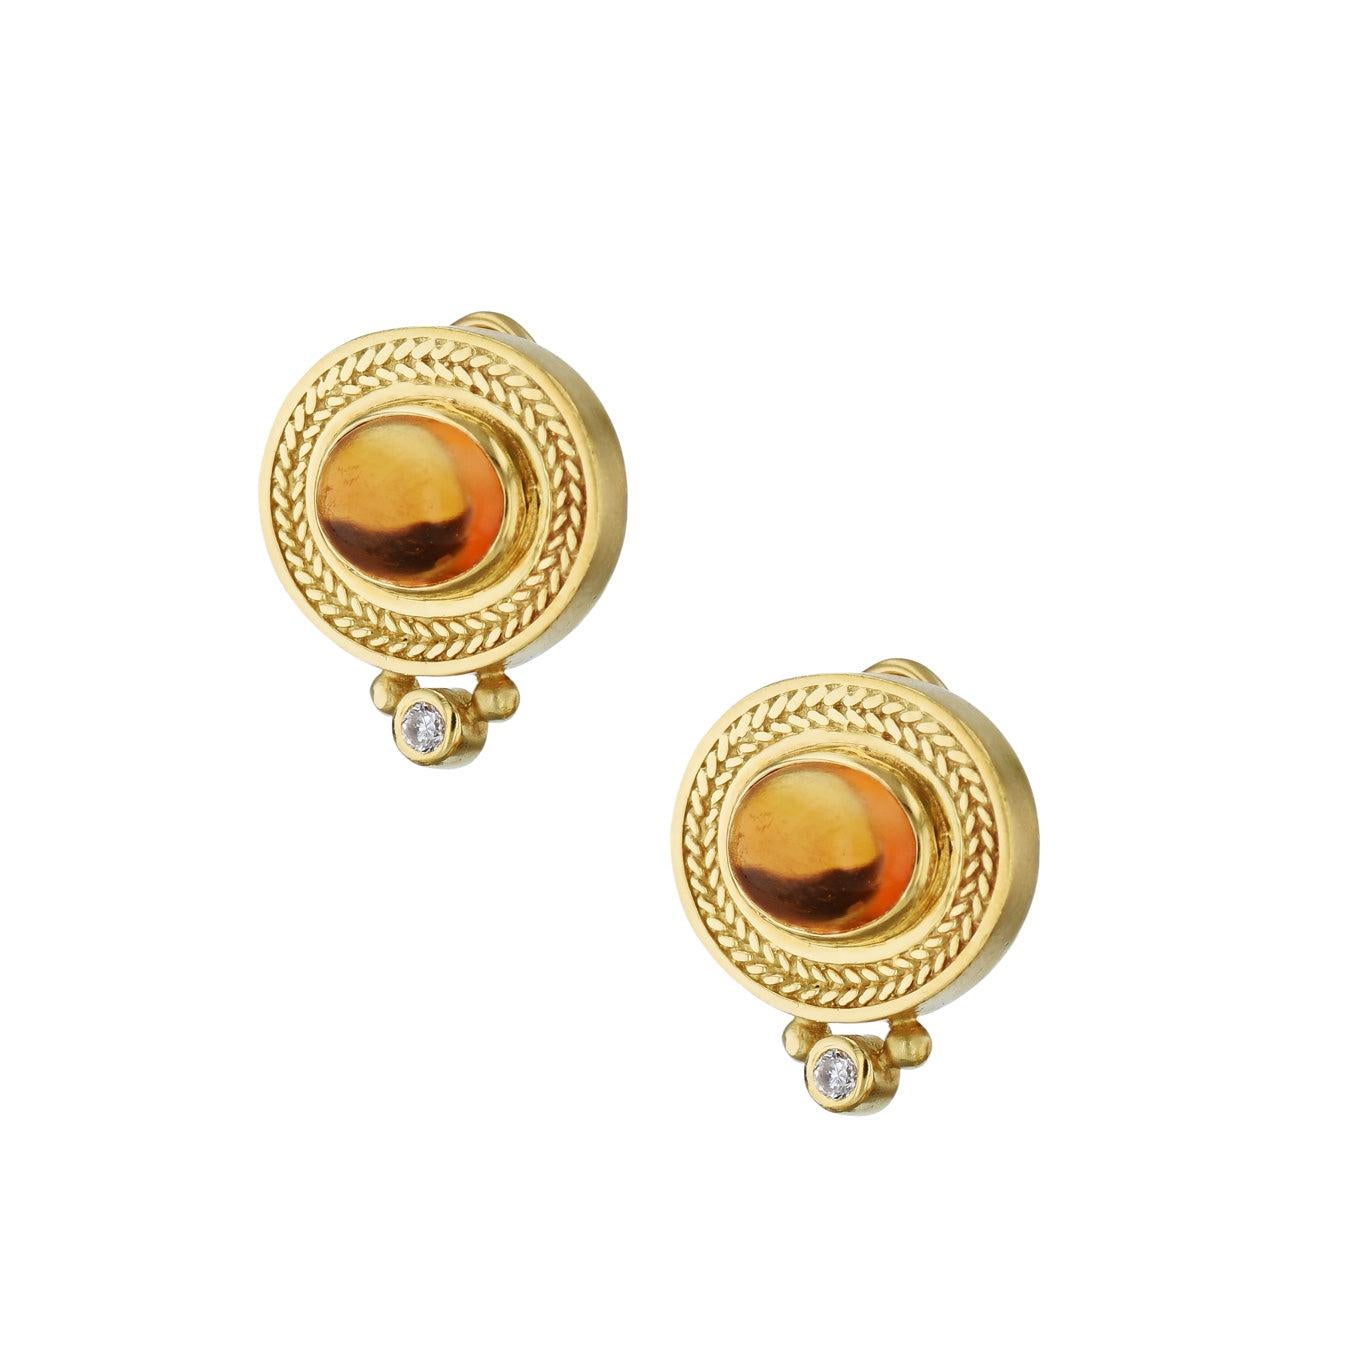 Gloriously crafted 18kt. Yellow Gold Citrine Diamond Estate Earrings, with two G-VS dazzling bezel set diamonds totaling around 0.10ct. A Seiden Gang masterpiece, these earrings are a timeless treasure!
Citrine Yellow Gold Diamond Estate